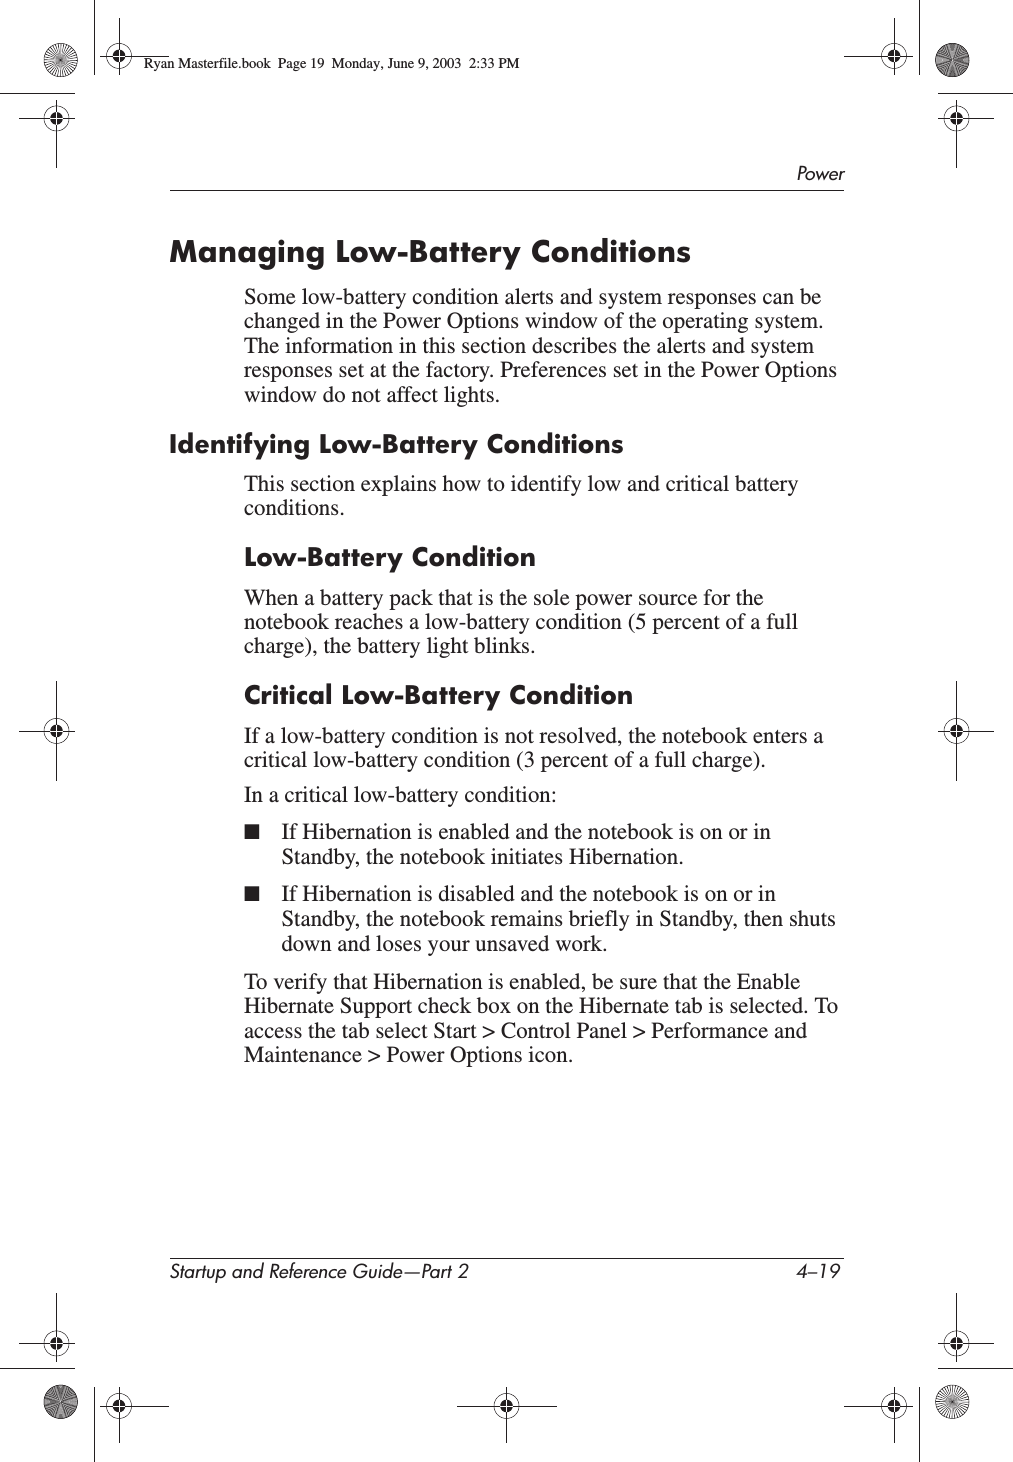 PowerStartup and Reference Guide—Part 2 4–19Managing Low-Battery ConditionsSome low-battery condition alerts and system responses can be changed in the Power Options window of the operating system. The information in this section describes the alerts and system responses set at the factory. Preferences set in the Power Options window do not affect lights.Identifying Low-Battery ConditionsThis section explains how to identify low and critical battery conditions.Low-Battery ConditionWhen a battery pack that is the sole power source for the notebook reaches a low-battery condition (5 percent of a full charge), the battery light blinks.Critical Low-Battery ConditionIf a low-battery condition is not resolved, the notebook enters a critical low-battery condition (3 percent of a full charge).In a critical low-battery condition:■If Hibernation is enabled and the notebook is on or in Standby, the notebook initiates Hibernation.■If Hibernation is disabled and the notebook is on or in Standby, the notebook remains briefly in Standby, then shuts down and loses your unsaved work.To verify that Hibernation is enabled, be sure that the Enable Hibernate Support check box on the Hibernate tab is selected. To access the tab select Start &gt; Control Panel &gt; Performance and Maintenance &gt; Power Options icon.Ryan Masterfile.book  Page 19  Monday, June 9, 2003  2:33 PM